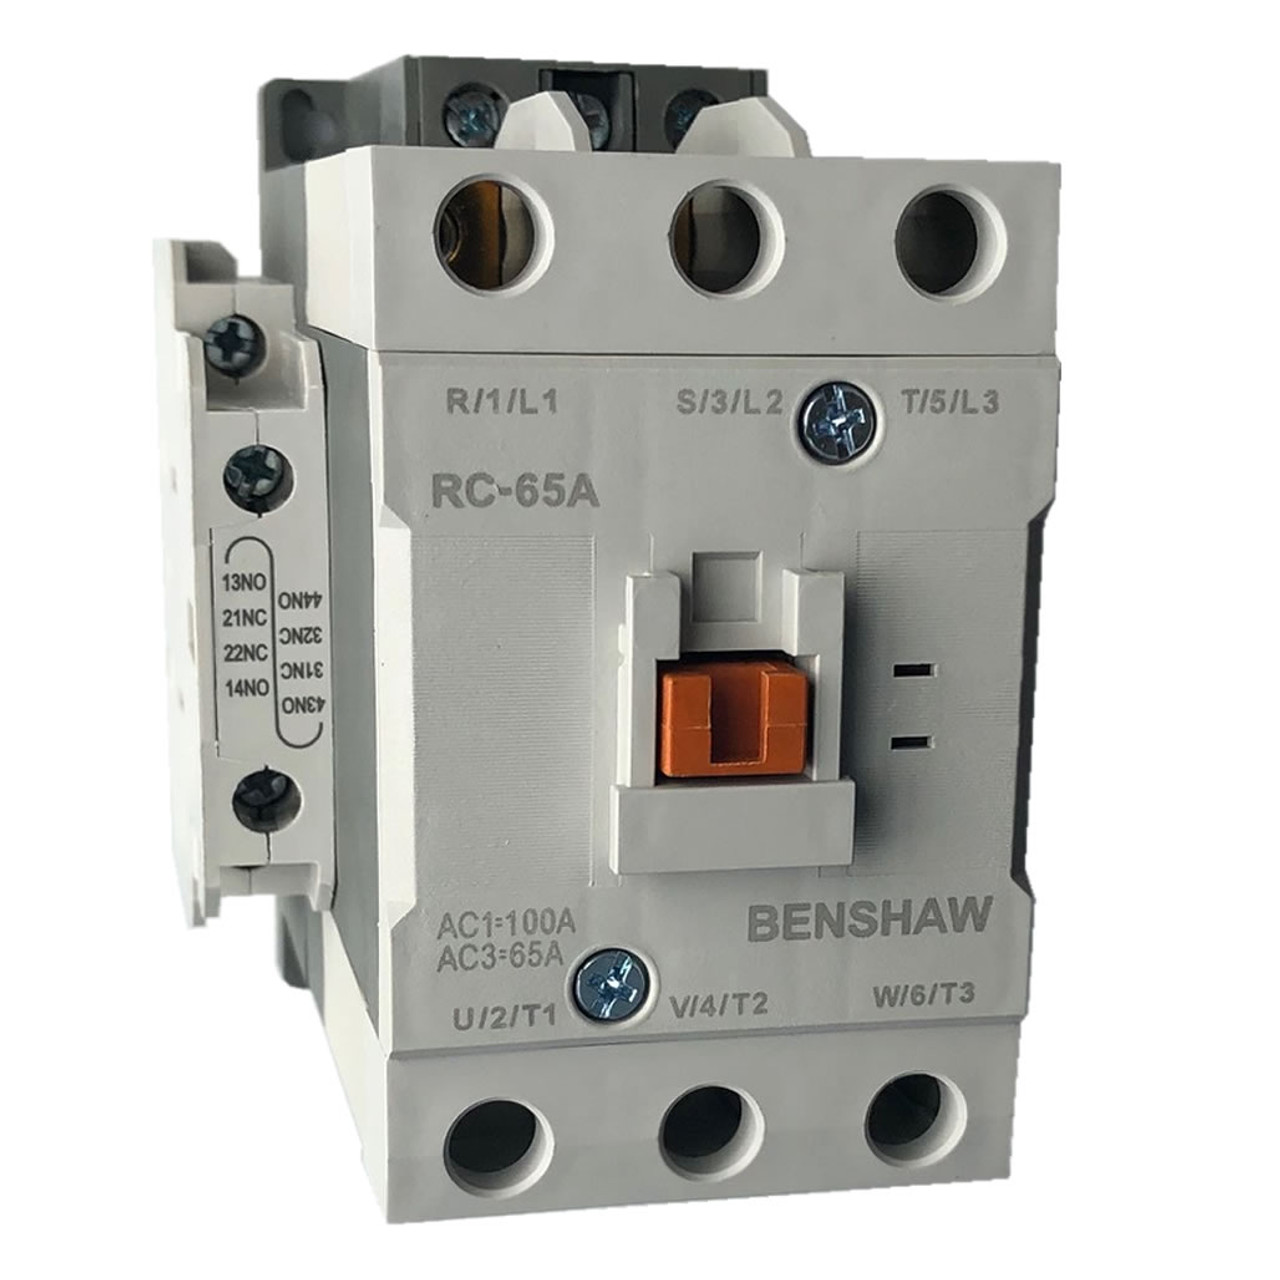 Benshaw RC-65A-56AC120 3 pole, 65 AMP contactor that is rated 30 H.P. @ 230 volt, 50 H.P. @ 460 volt 3 Phase and a 120 volt AC coil. Comes pre-installed with 2 side mounted auxiliary contacts (1 N.O./1 N.C. each), screw terminals and mounts on standard 35MM DIN rail.